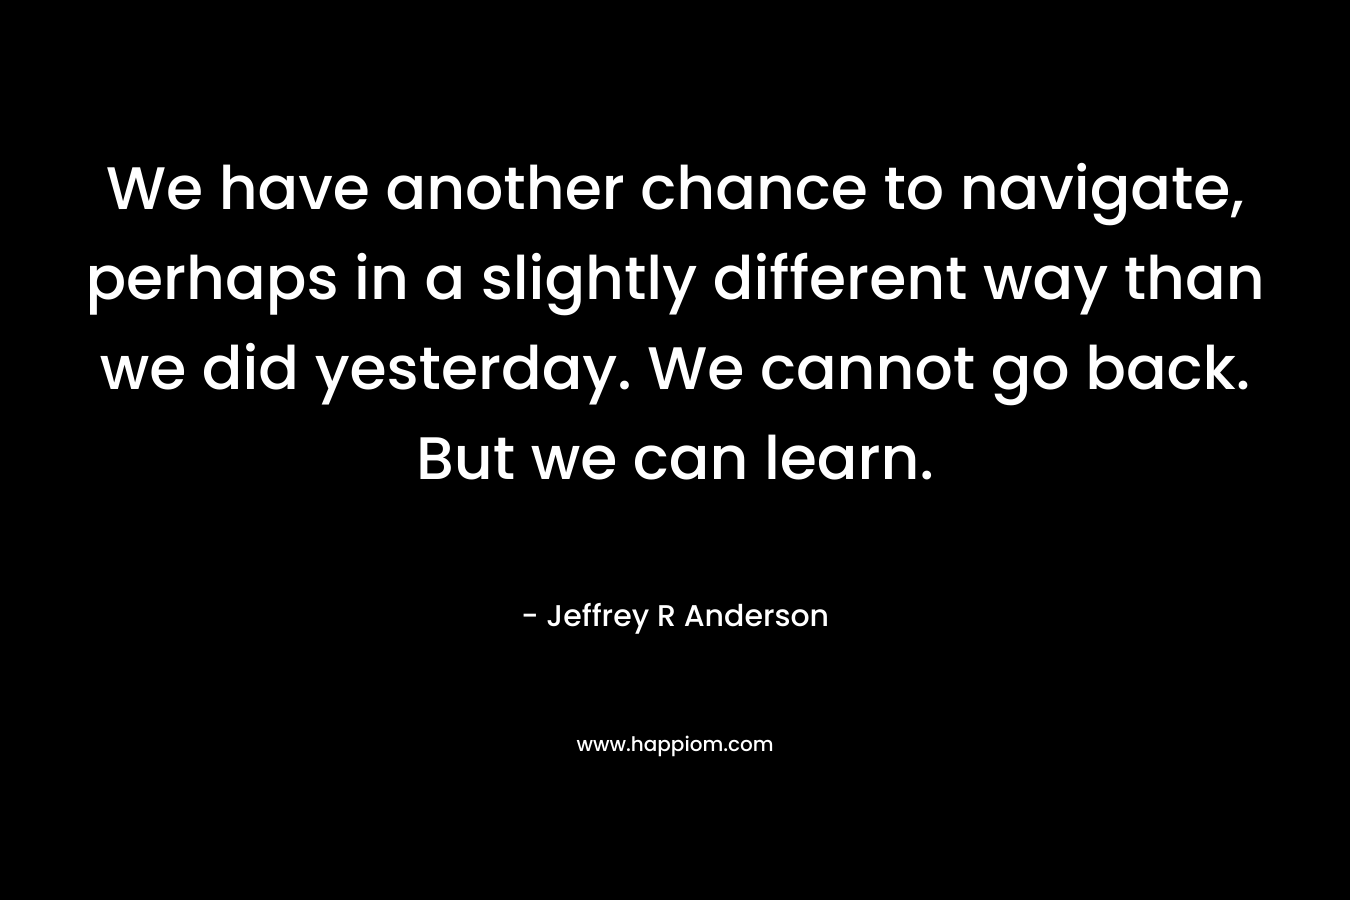 We have another chance to navigate, perhaps in a slightly different way than we did yesterday. We cannot go back. But we can learn. – Jeffrey R Anderson